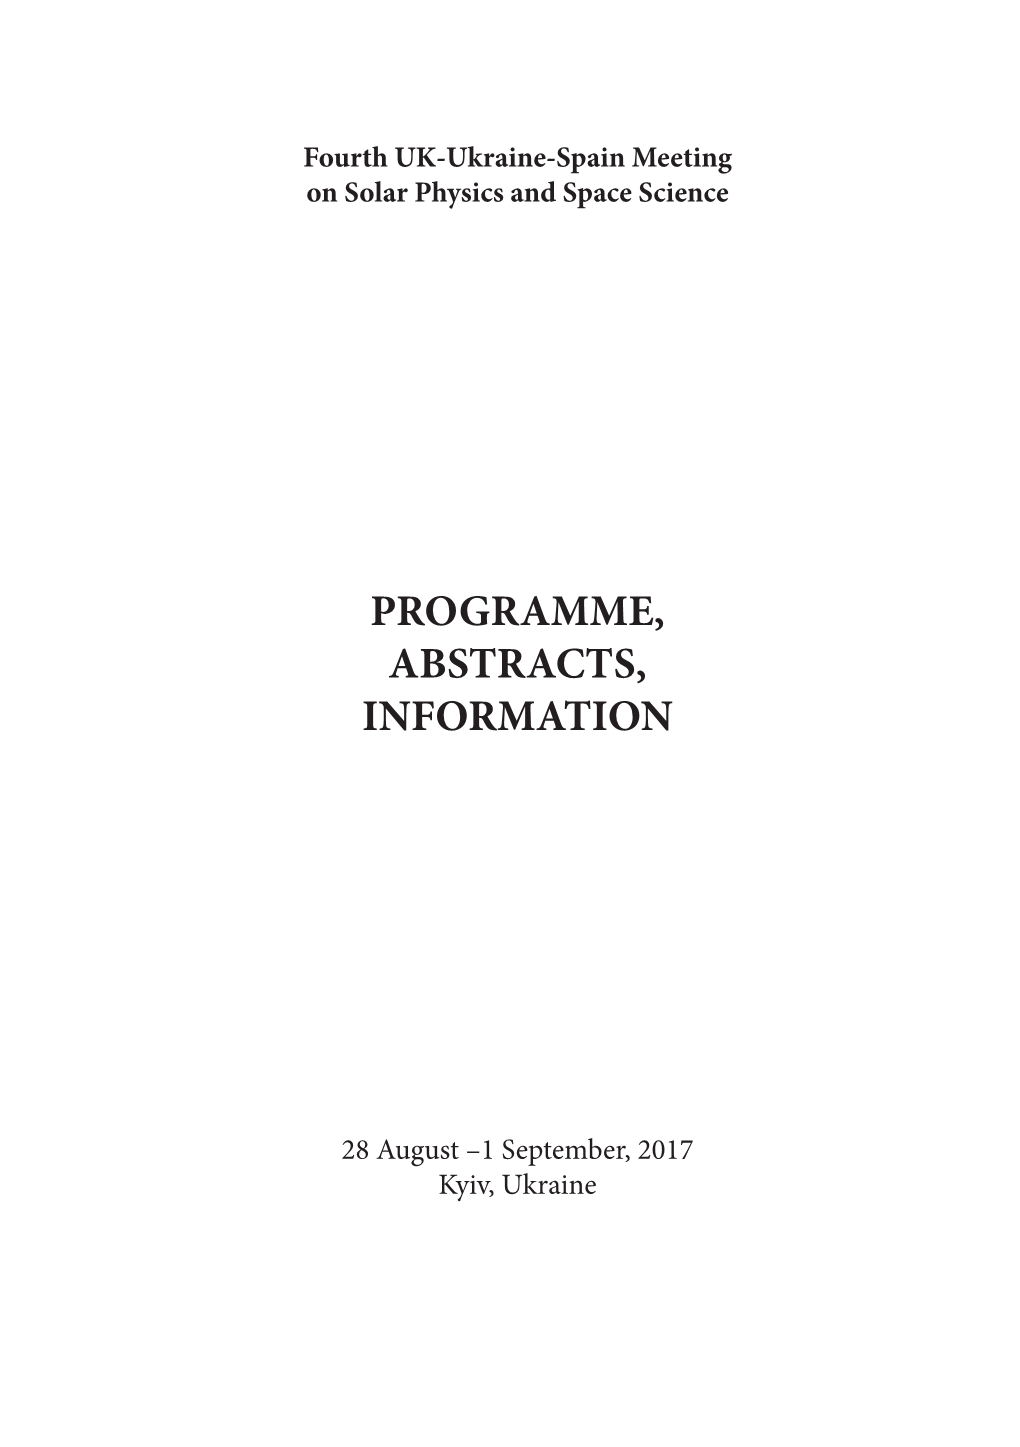 Programme, Abstracts, Information